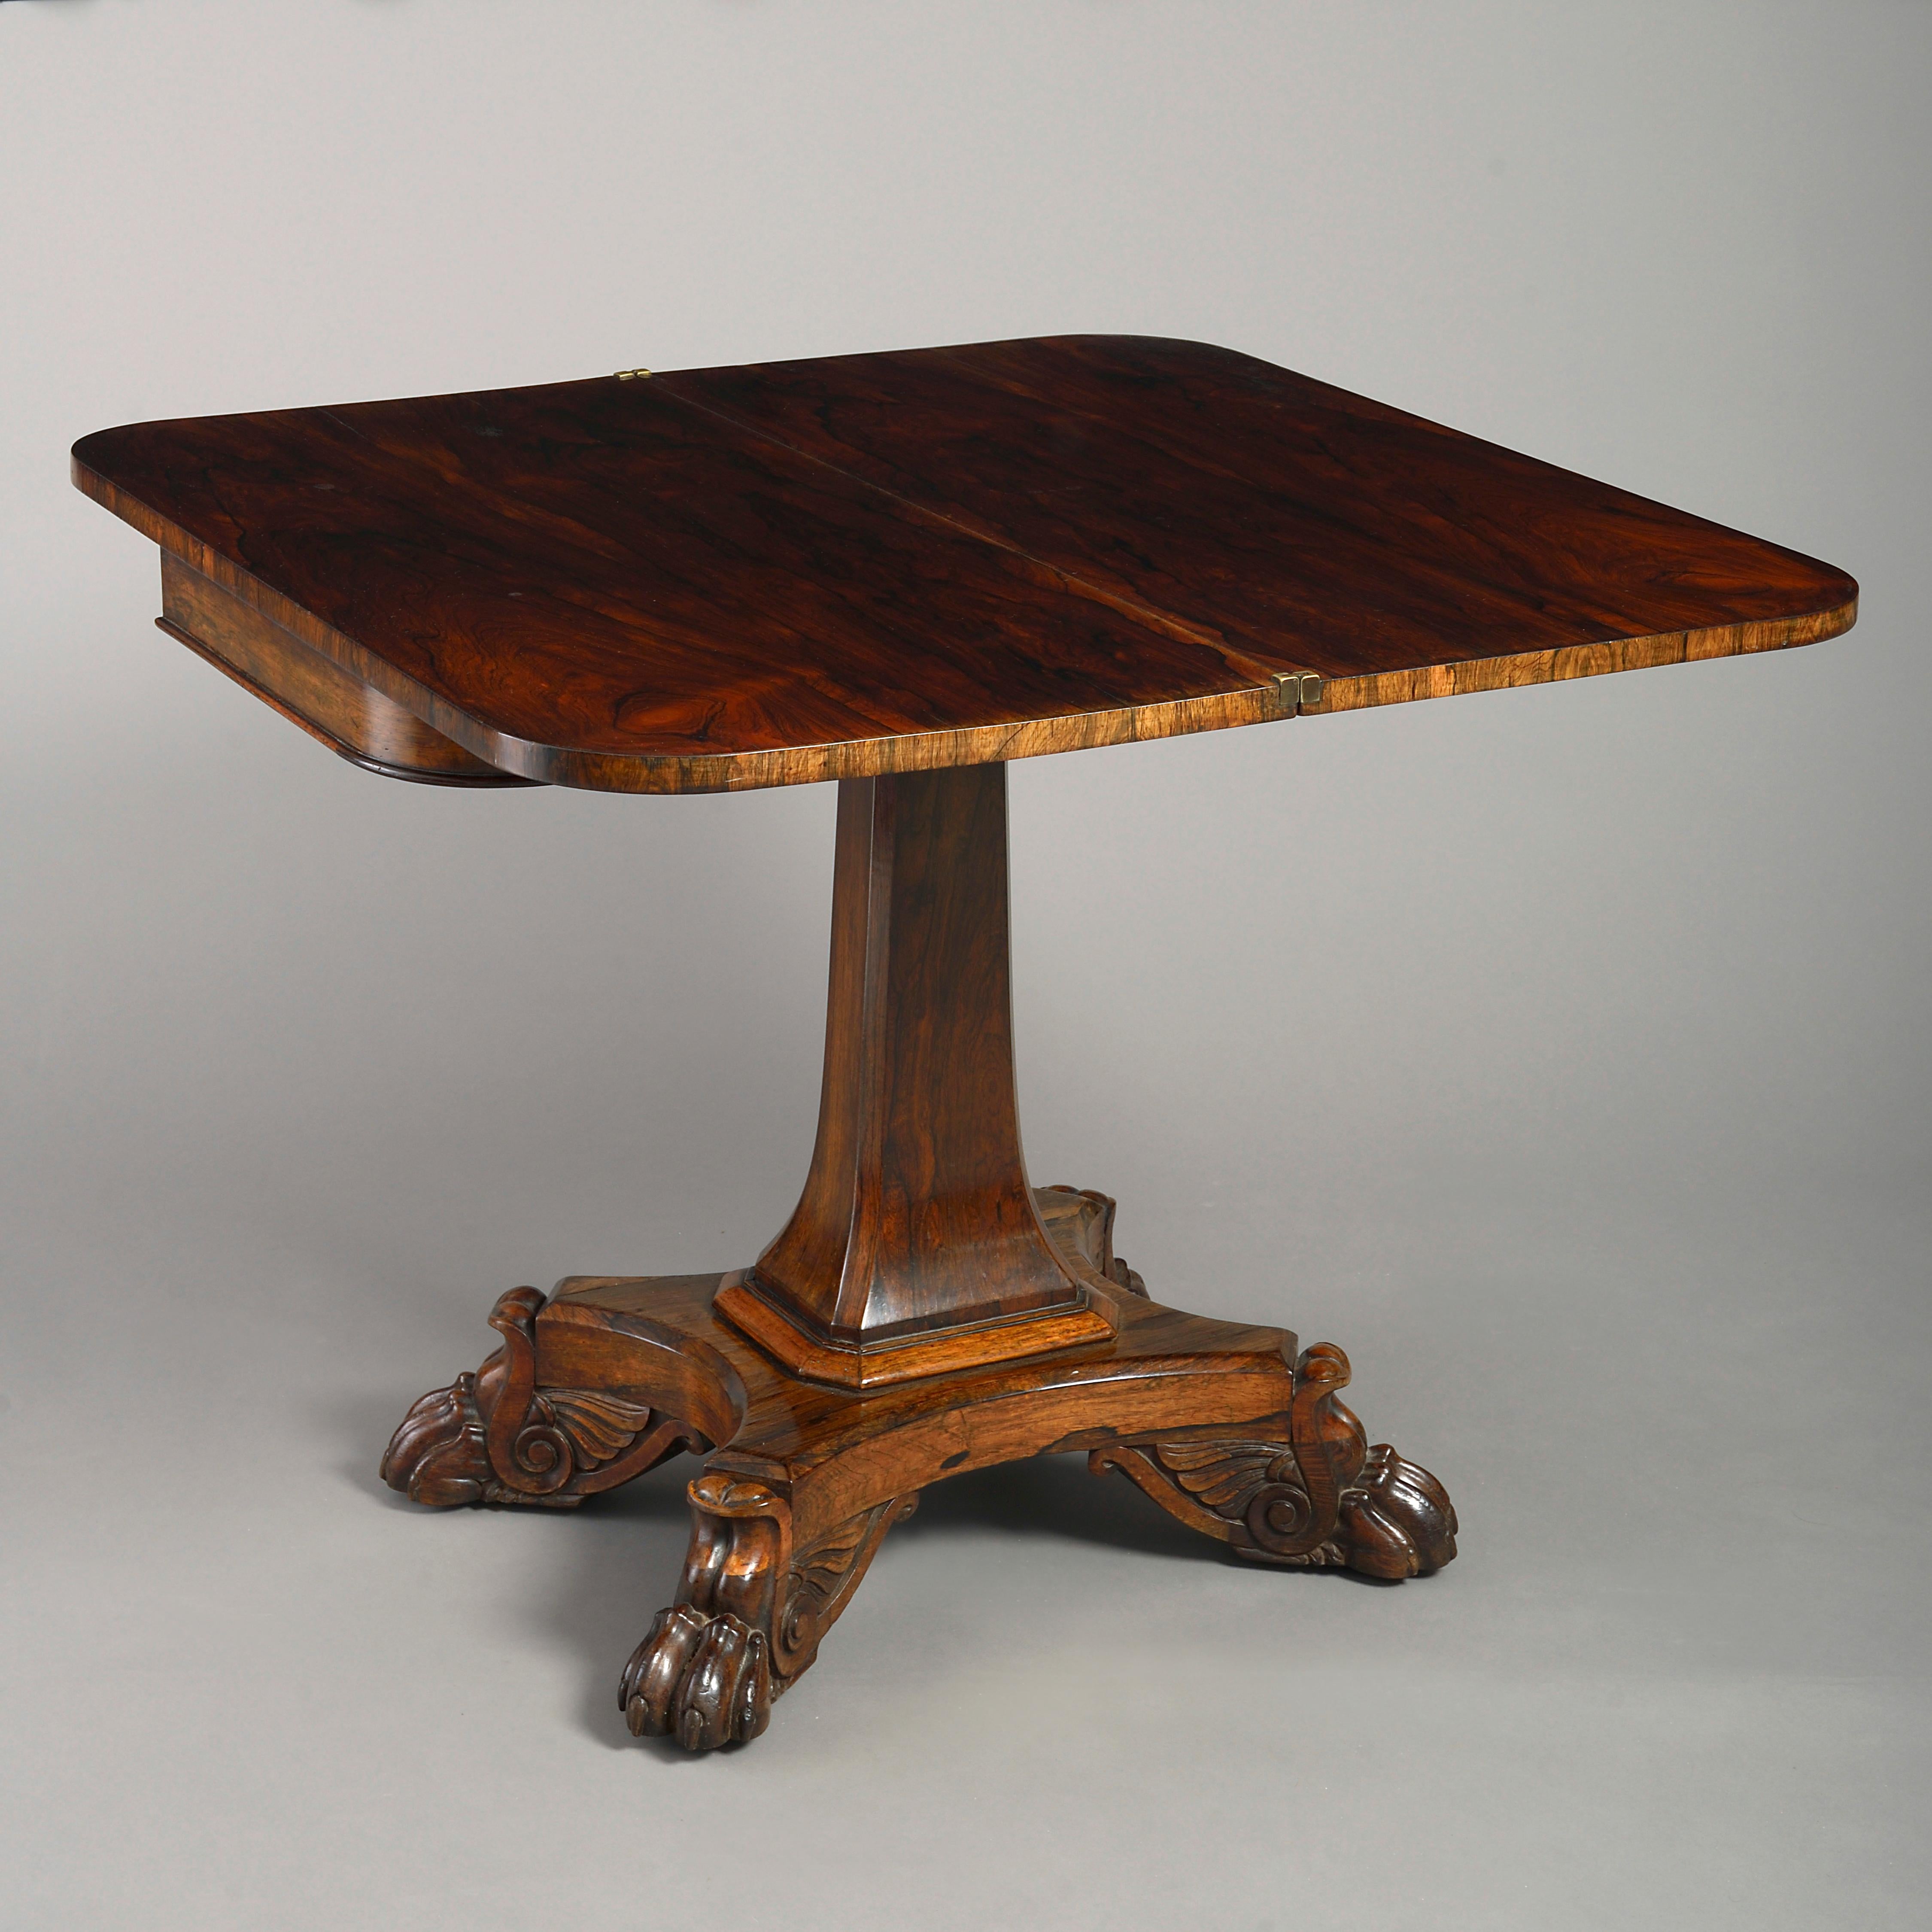 Hand-Carved Early 19th Century Regency Period Rosewood Tea Table